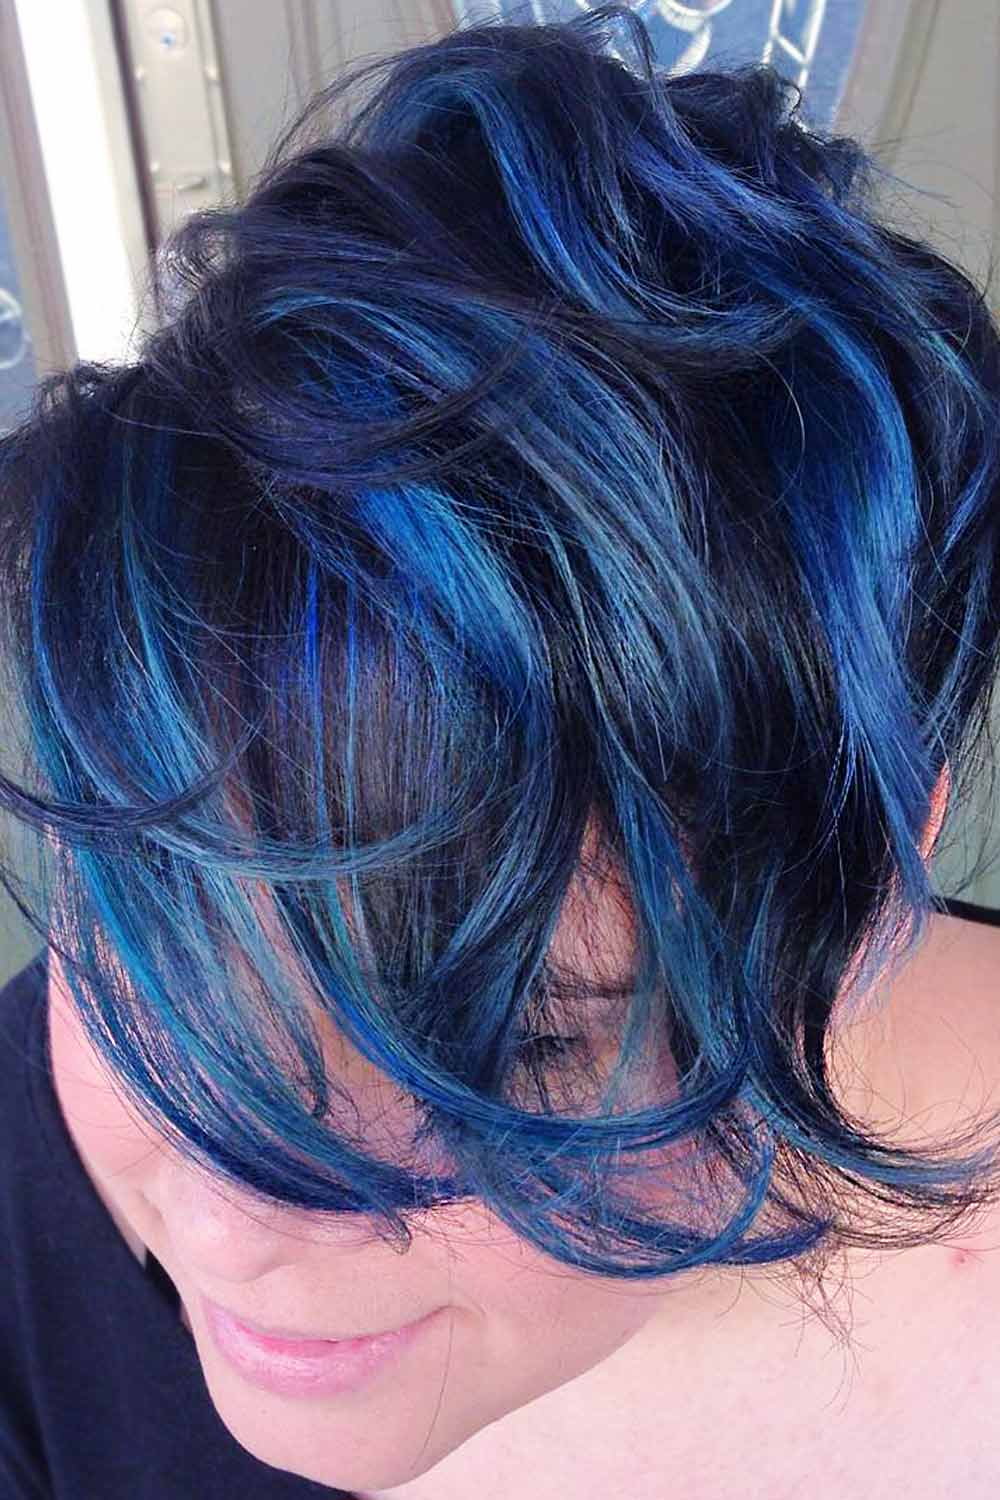 Black Haircut With Blue Highlights #blackhairwithhighlights #hairwithhighlights #blue